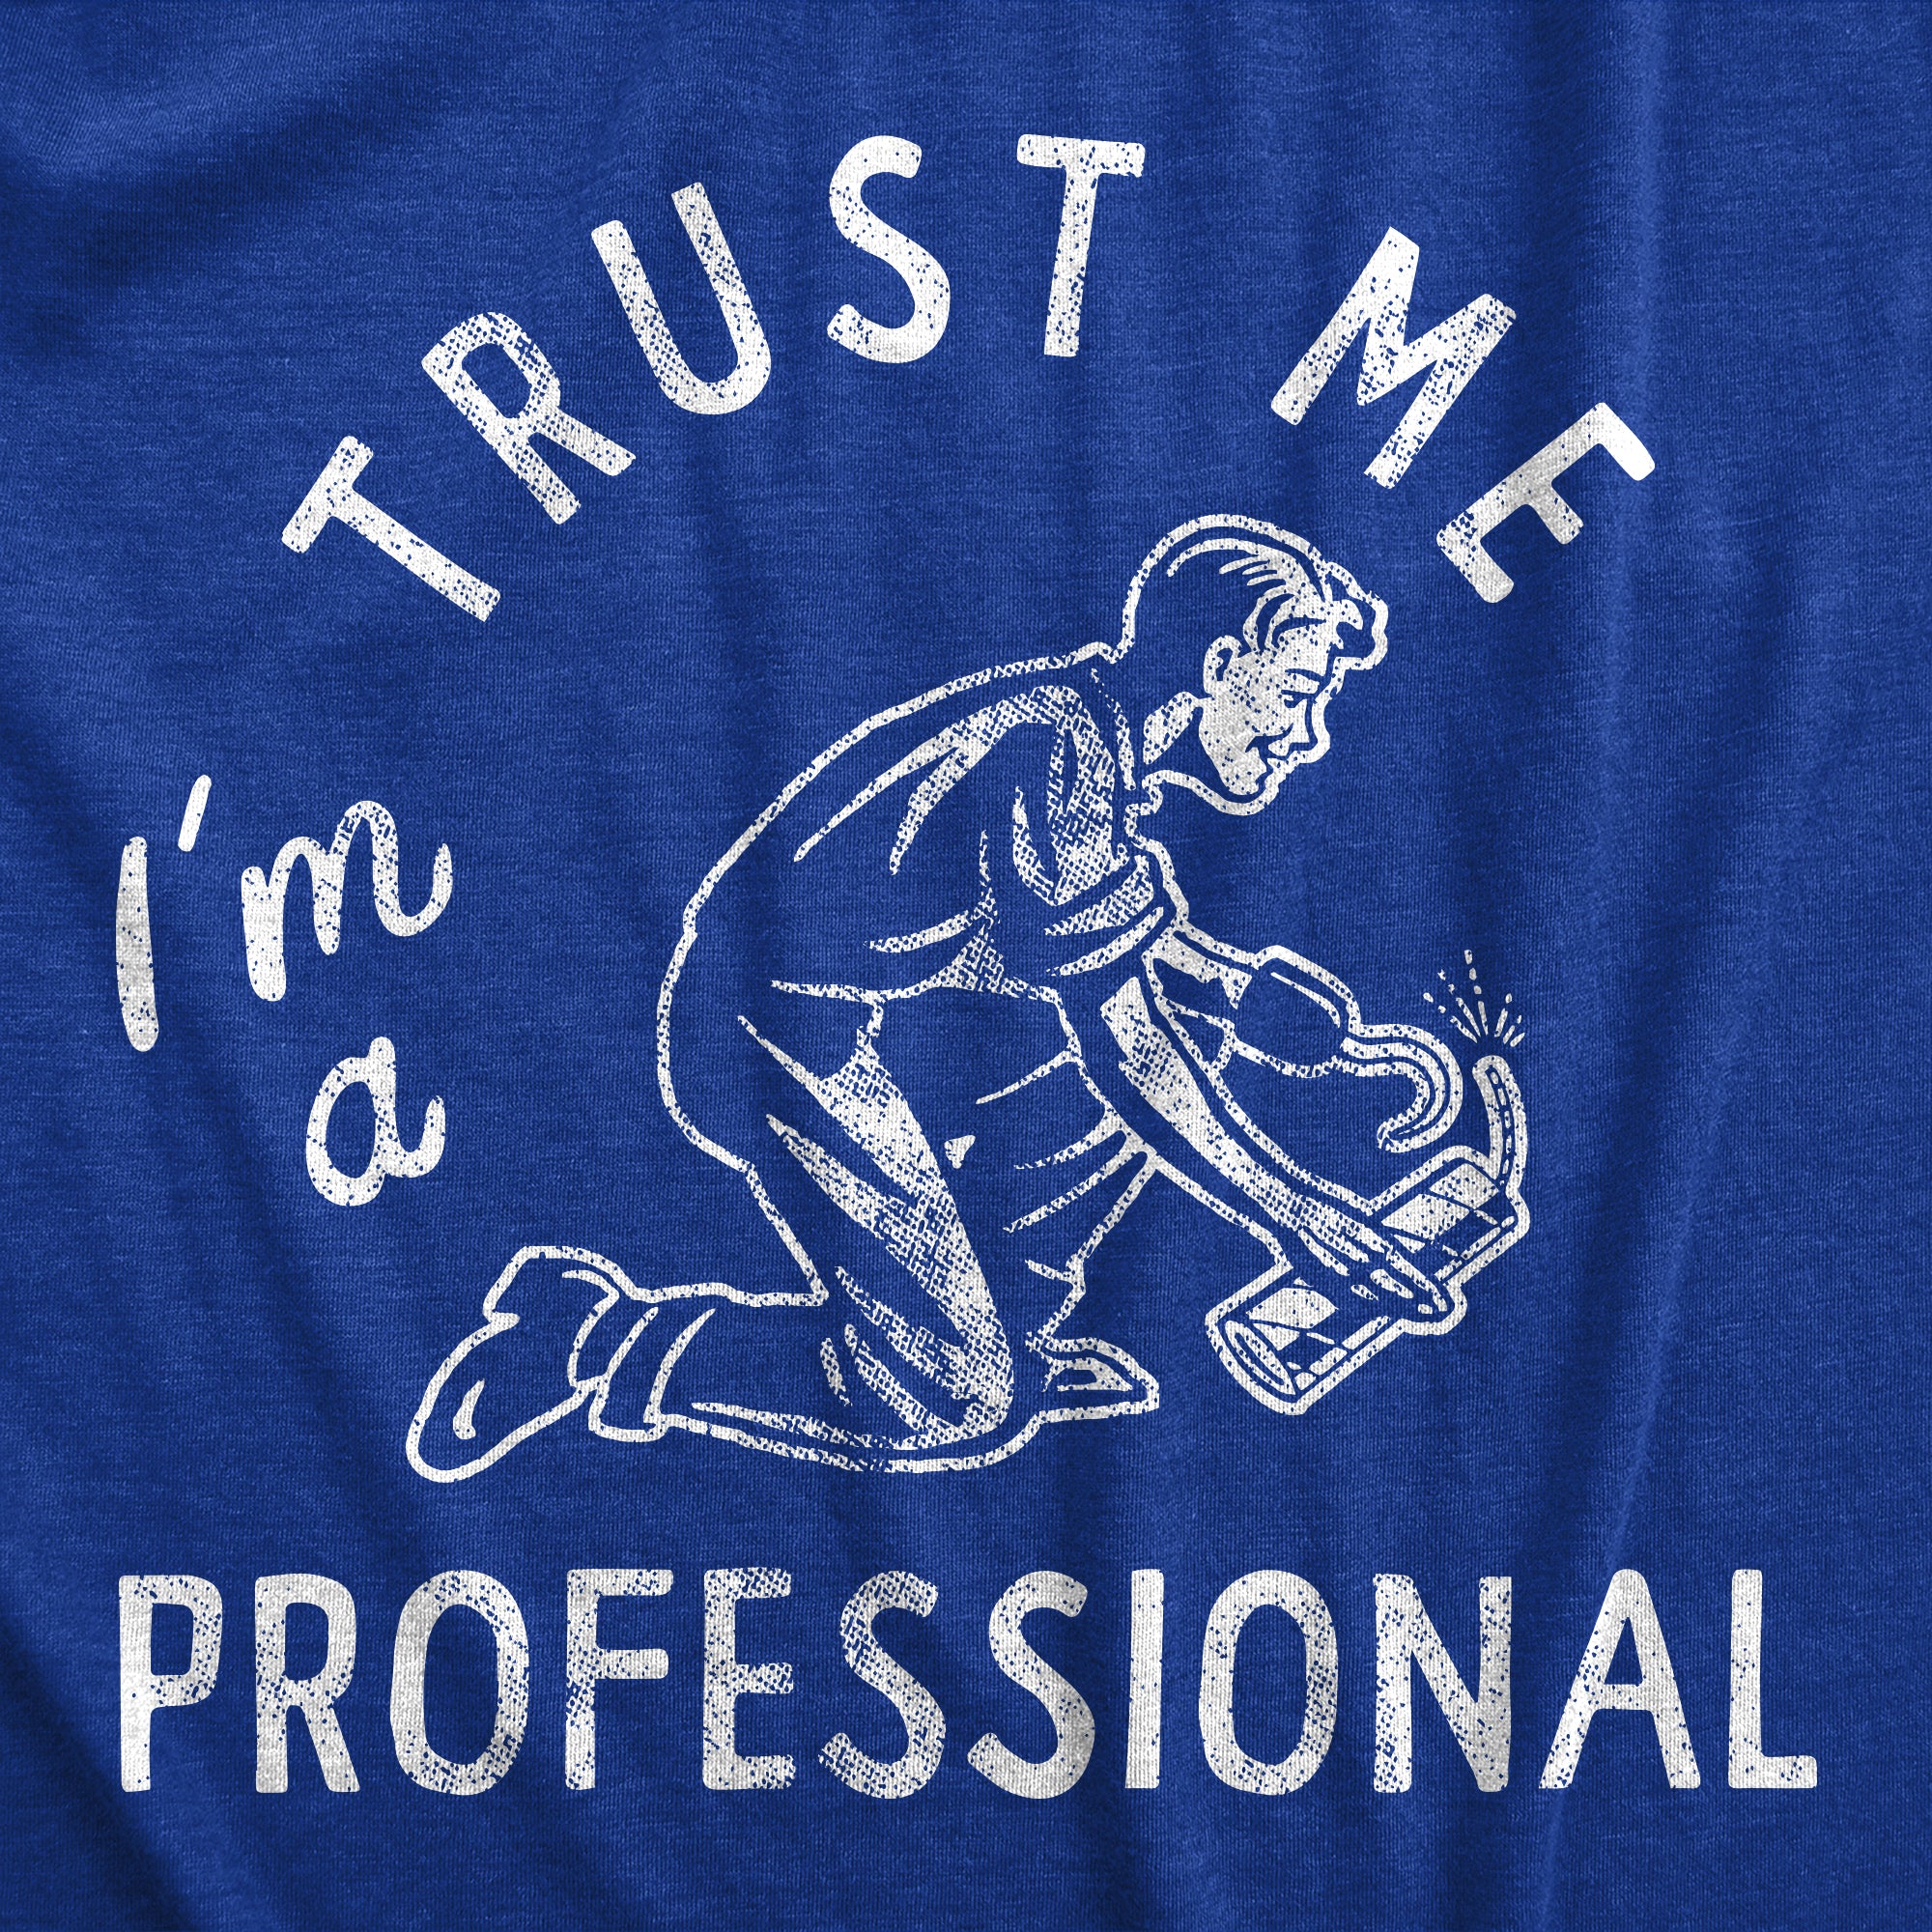 Funny Heather Royal Trust Me Im A Professional Mens T Shirt Nerdy Fourth of July Sarcastic Tee